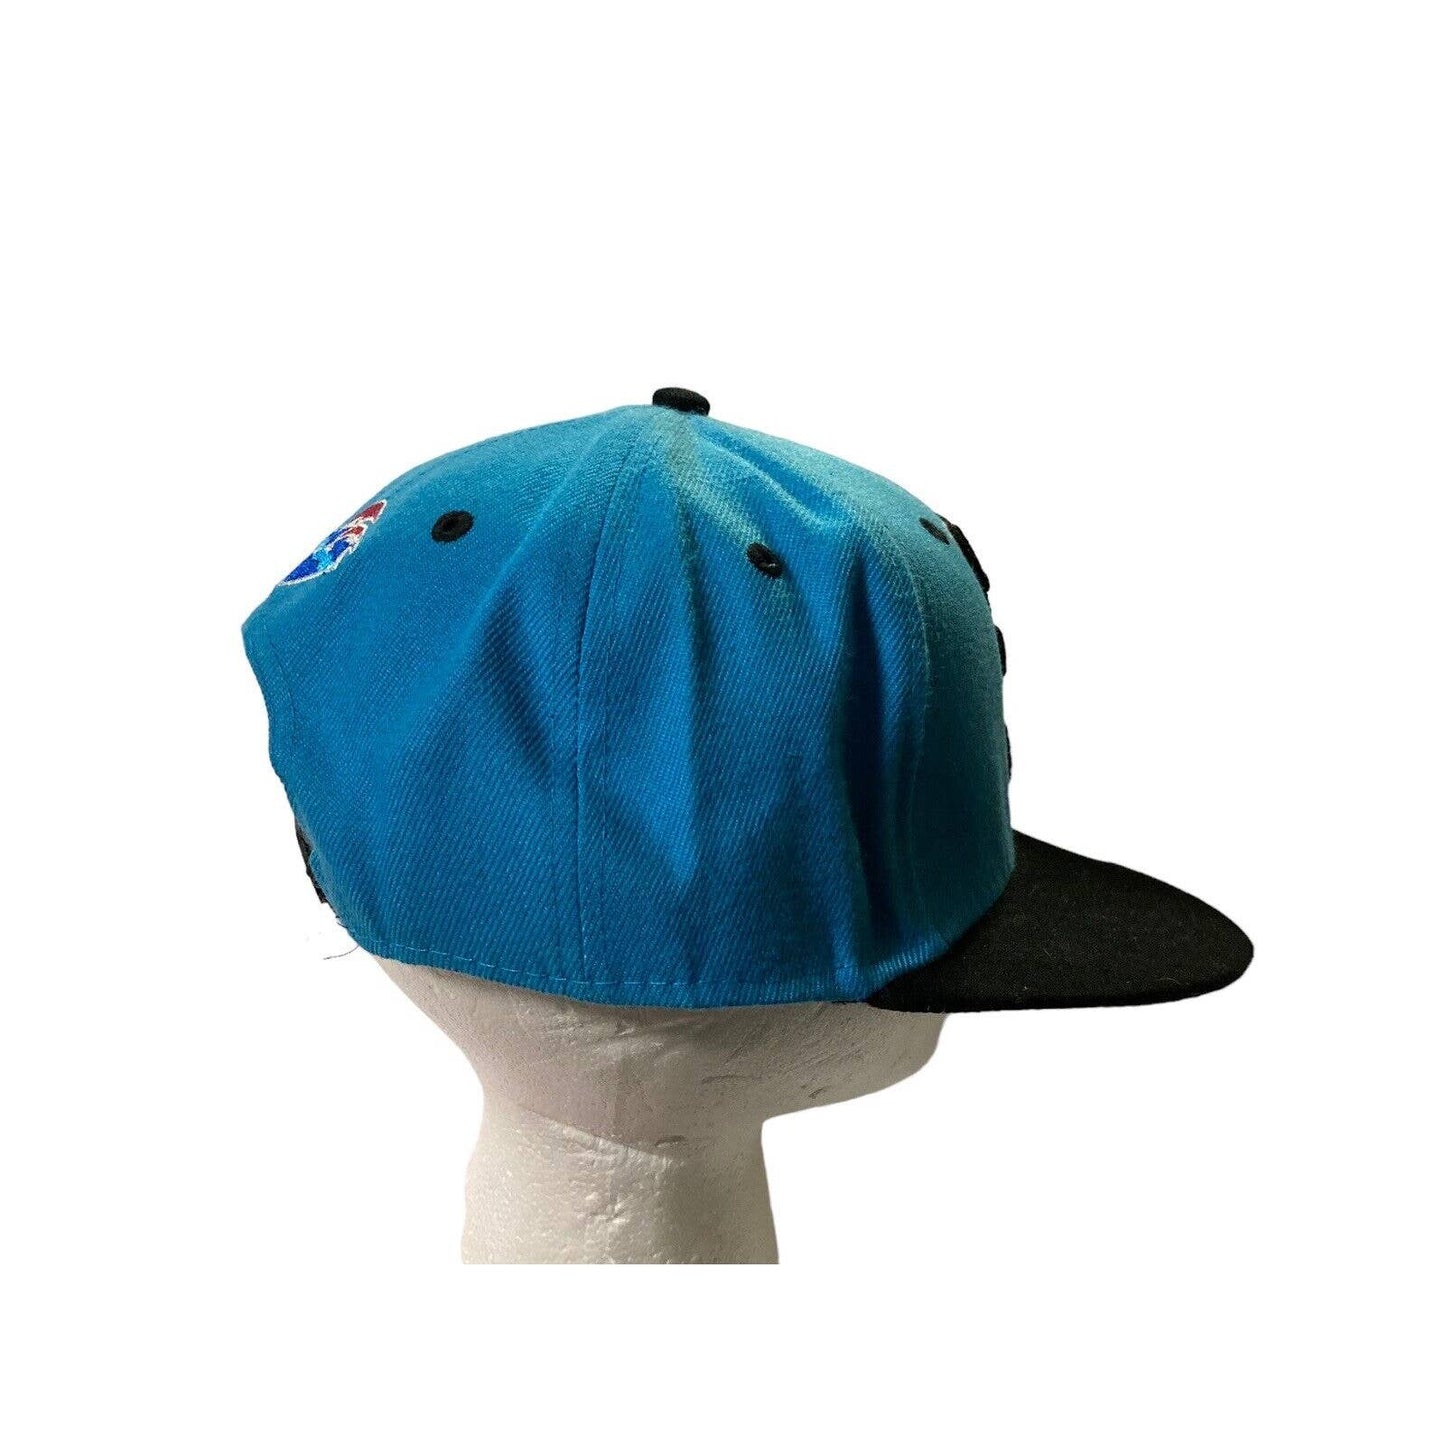 Pink + Dolphin P Logo Snapback Embroidered Hat Cap Blue Black